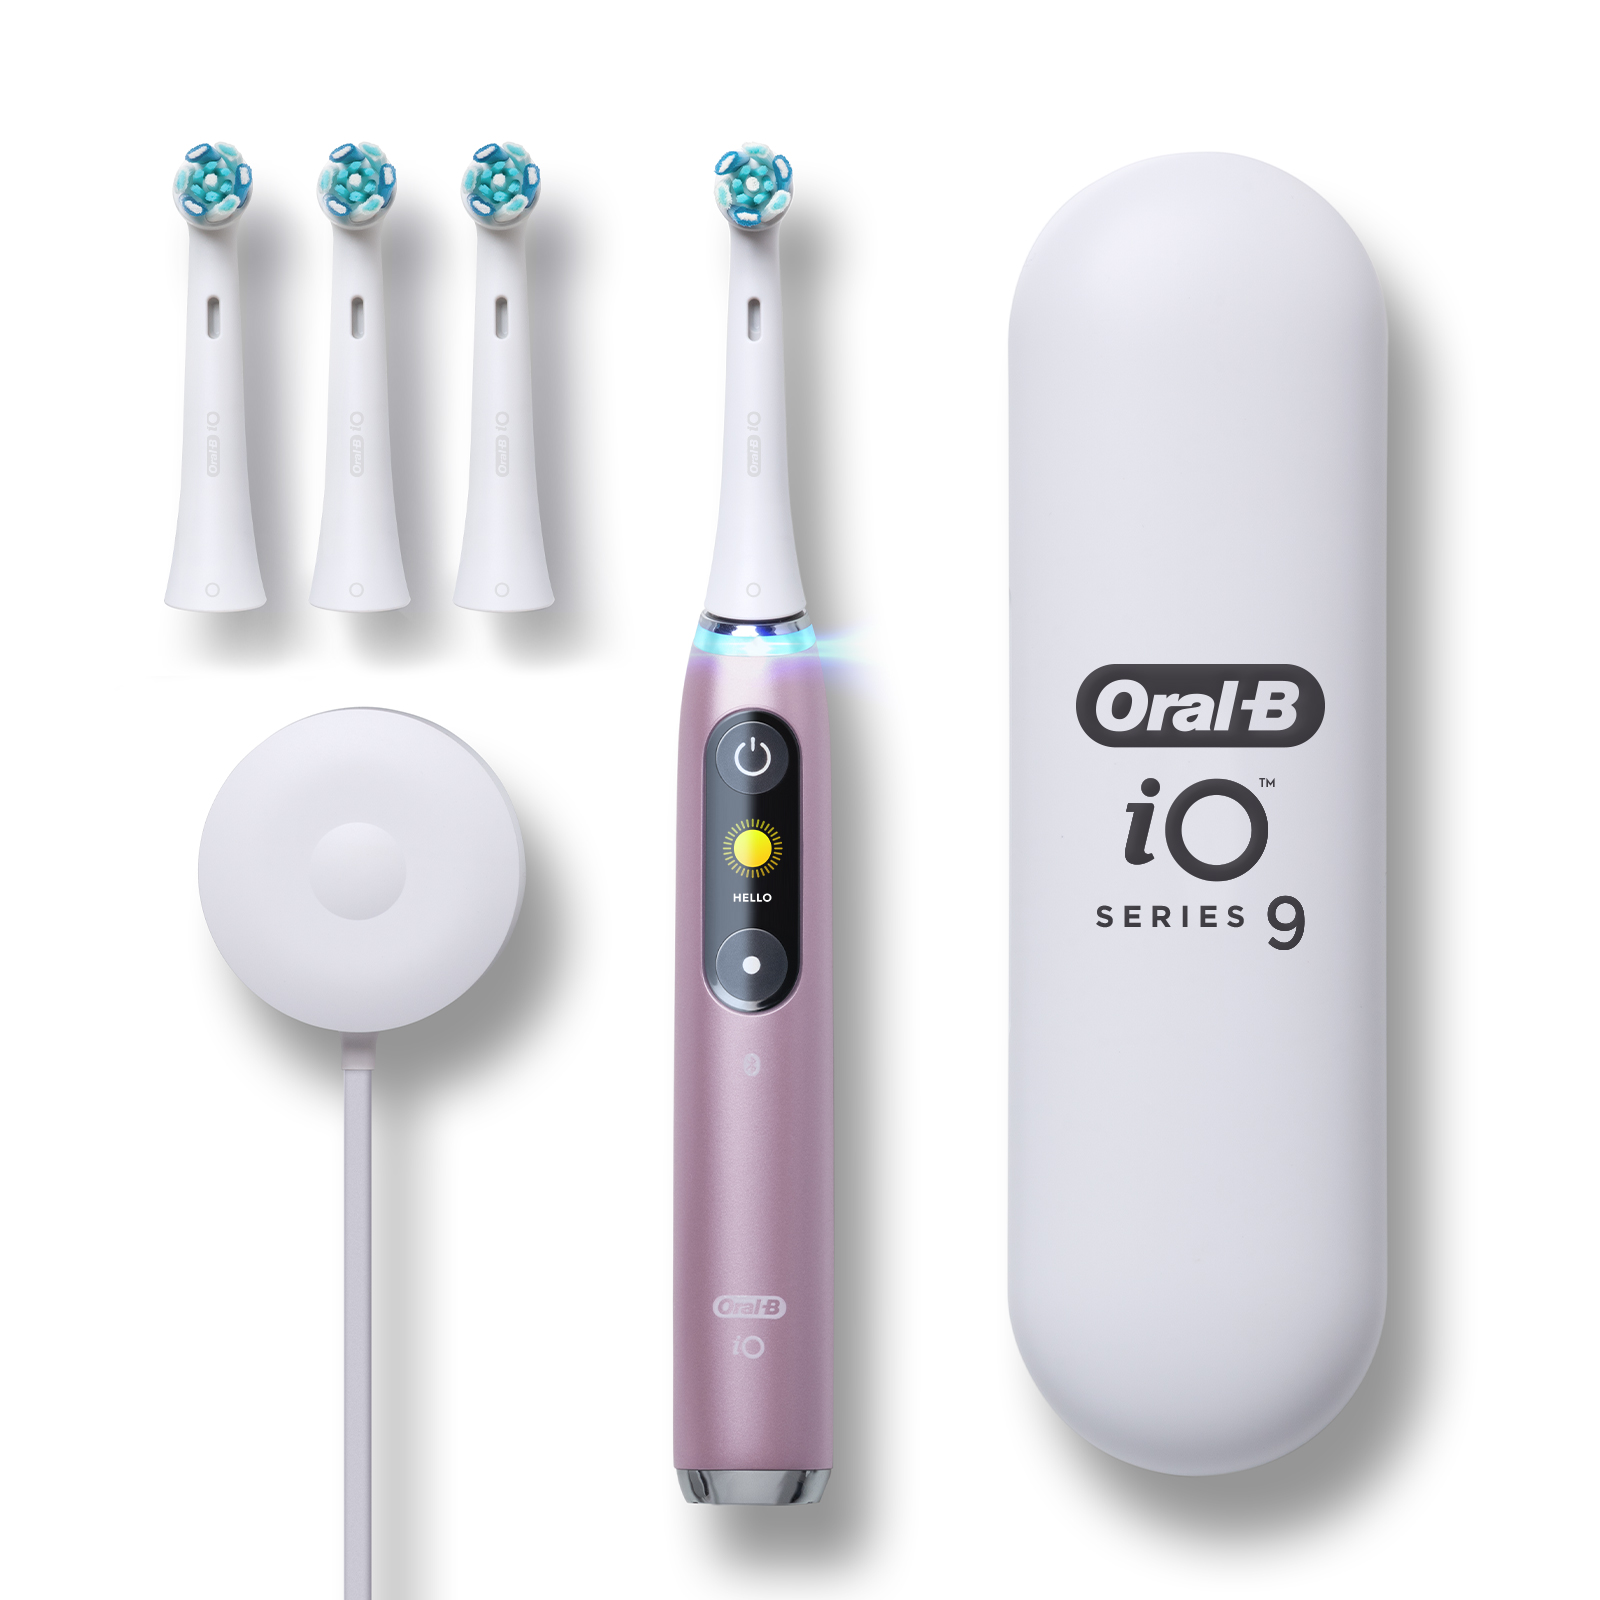 Oral-B iO Series 9 Electric Toothbrush with 4 Brush Heads, Rose Quartz - image 1 of 15